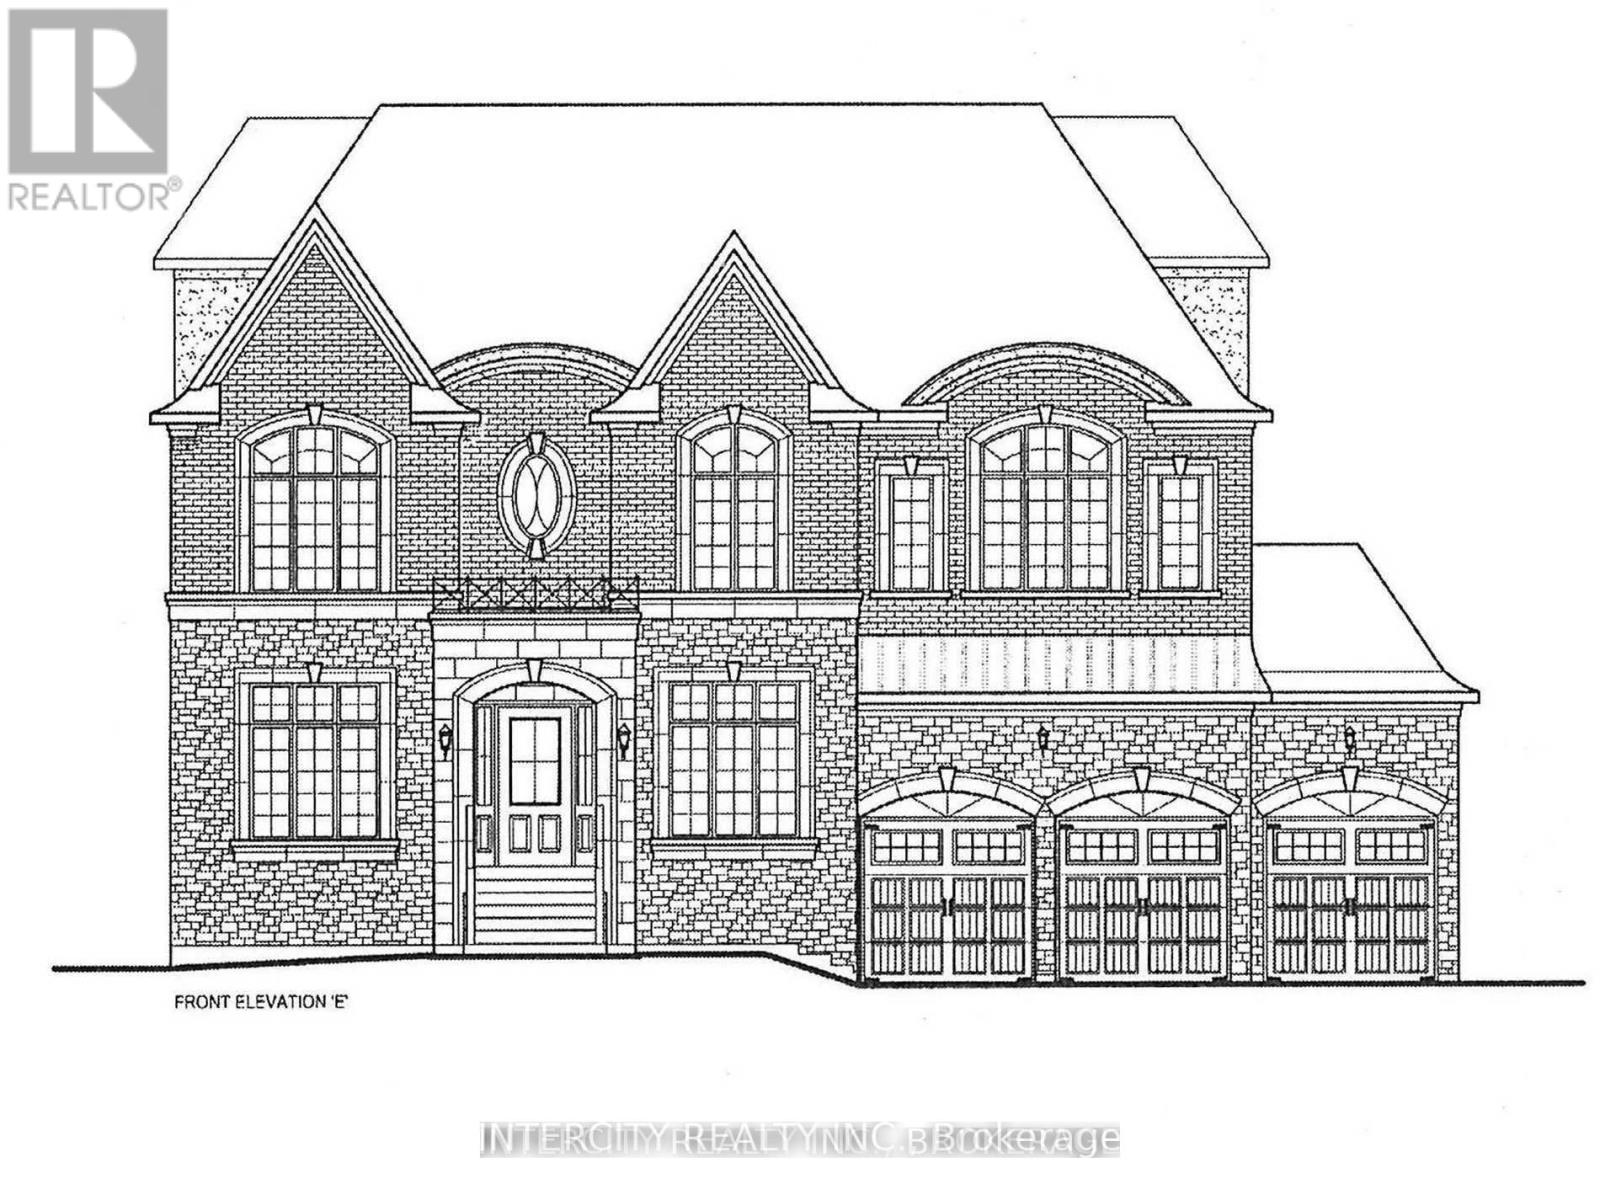 LOT 79 WOODGATE PINES DR located in Vaughan, Ontario